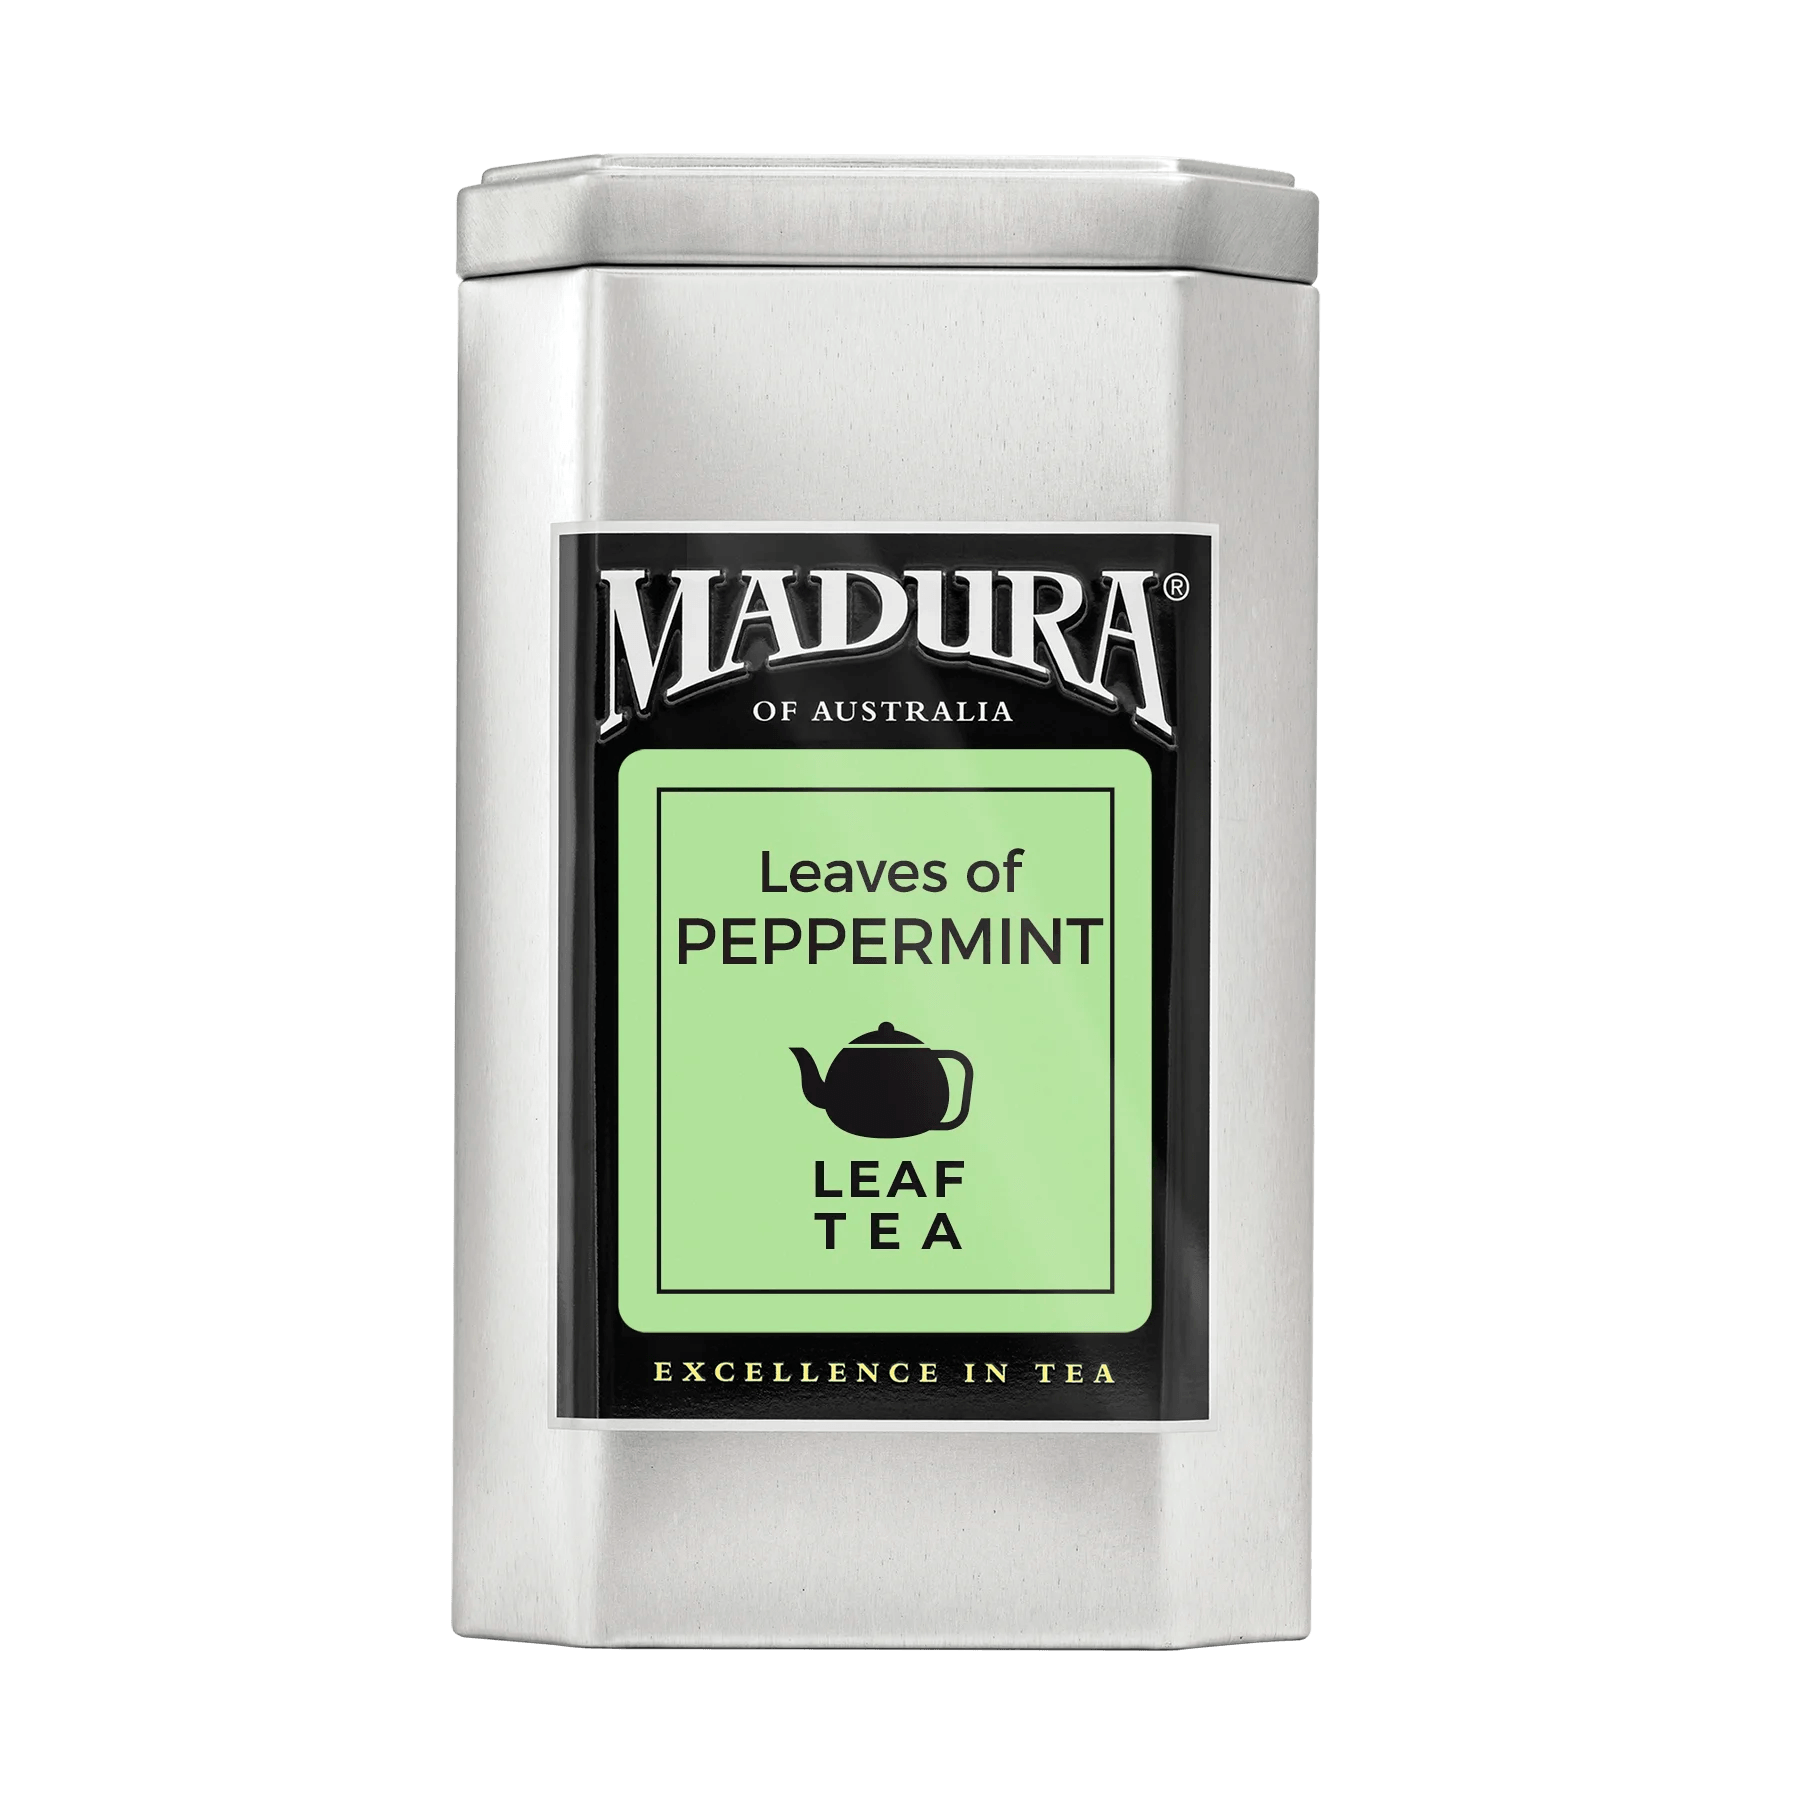 Empty Caddy with Leaves of Peppermint Leaf Tea Label - Madura Tea